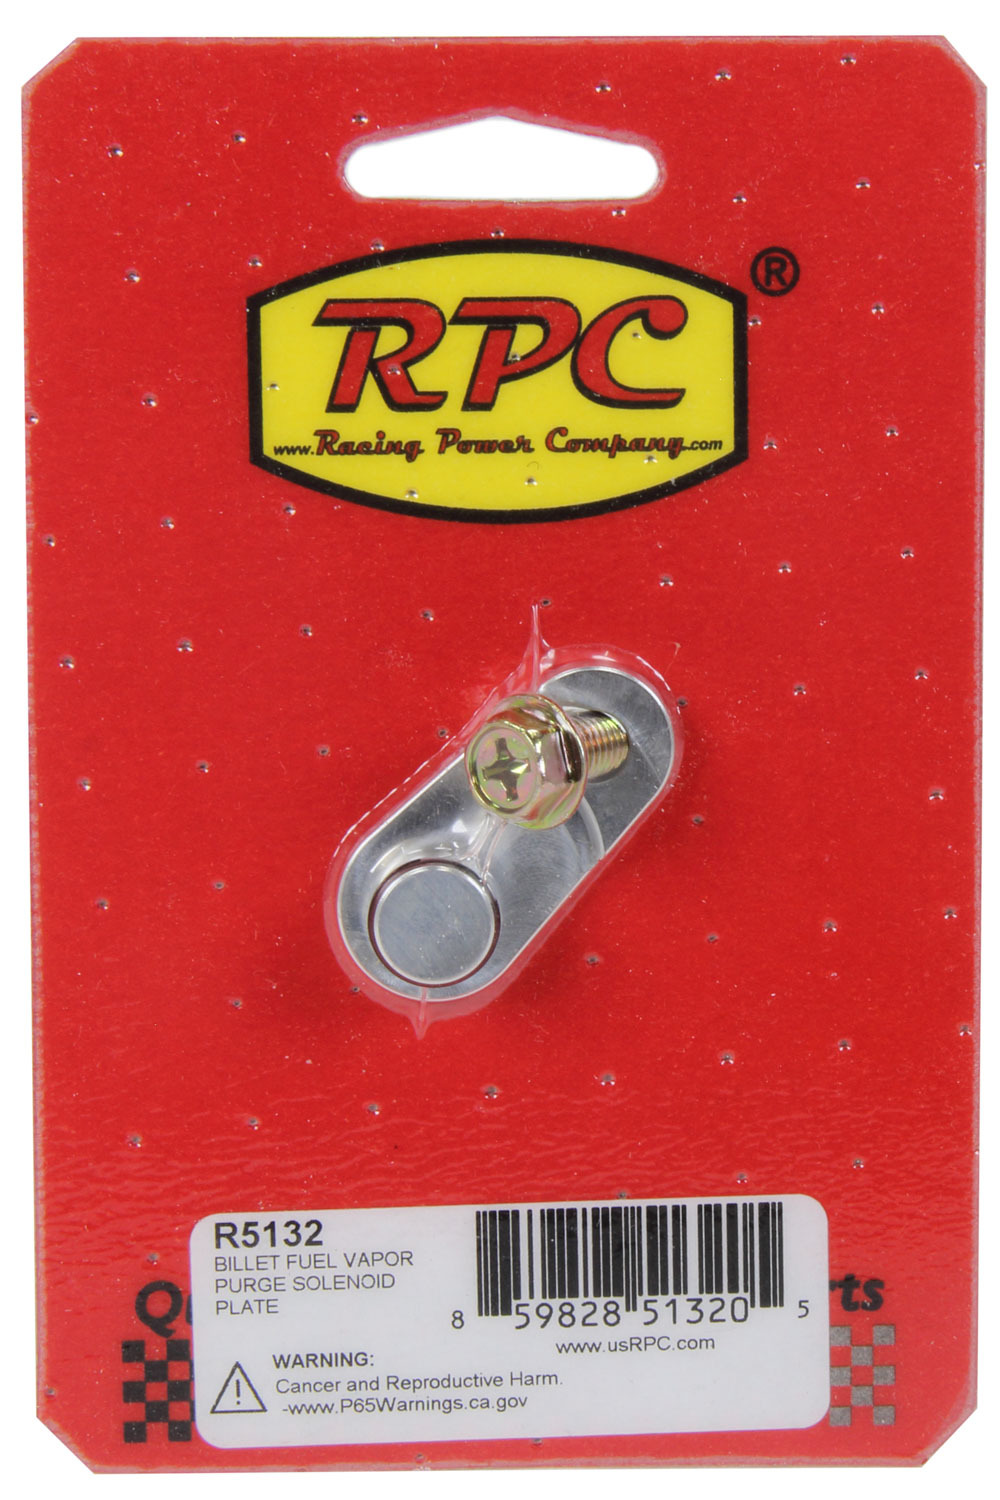 Racing Power Company R5132 EVAP Purge Solenoid Plug, Bolt / O-Ring Included, Aluminum, Natural, GM LS-Series Manifolds, Kit